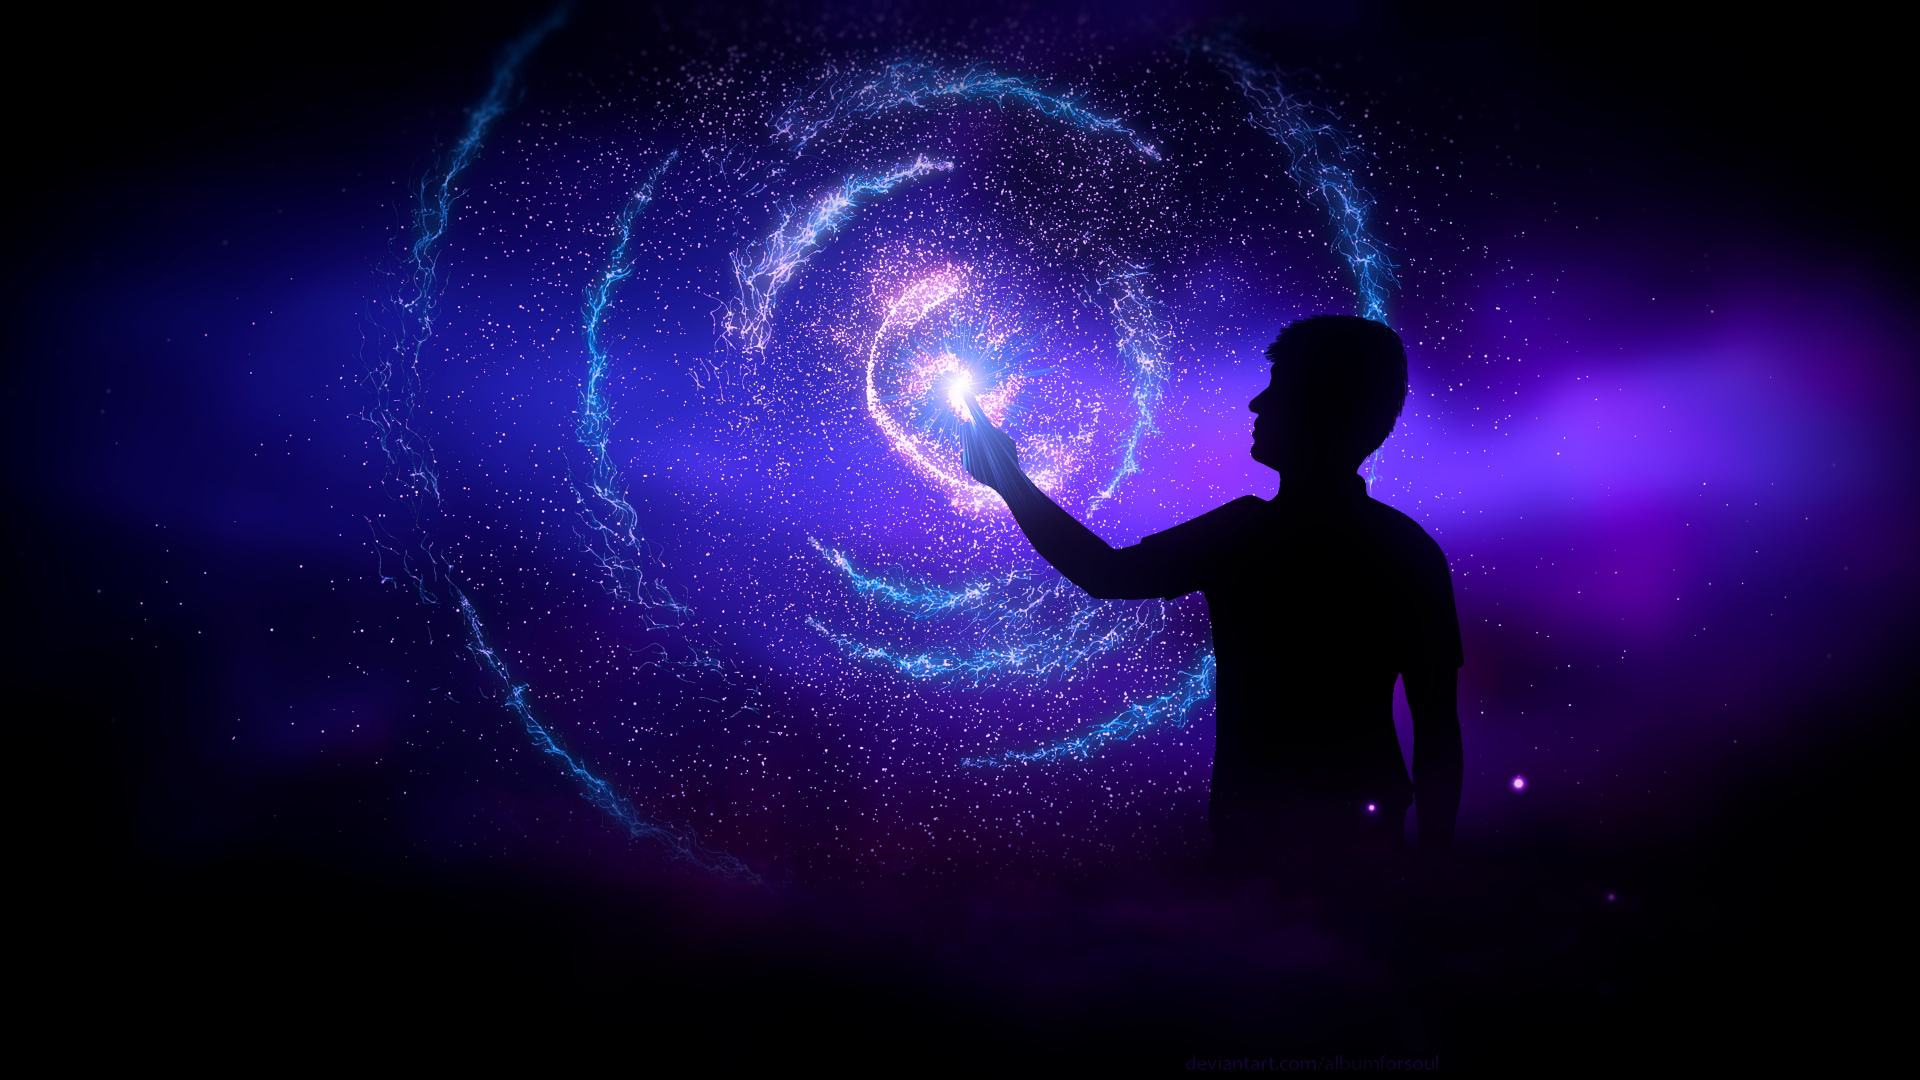 Silhouette of Man Standing in Front of Purple Light. Wallpaper in 1920x1080 Resolution